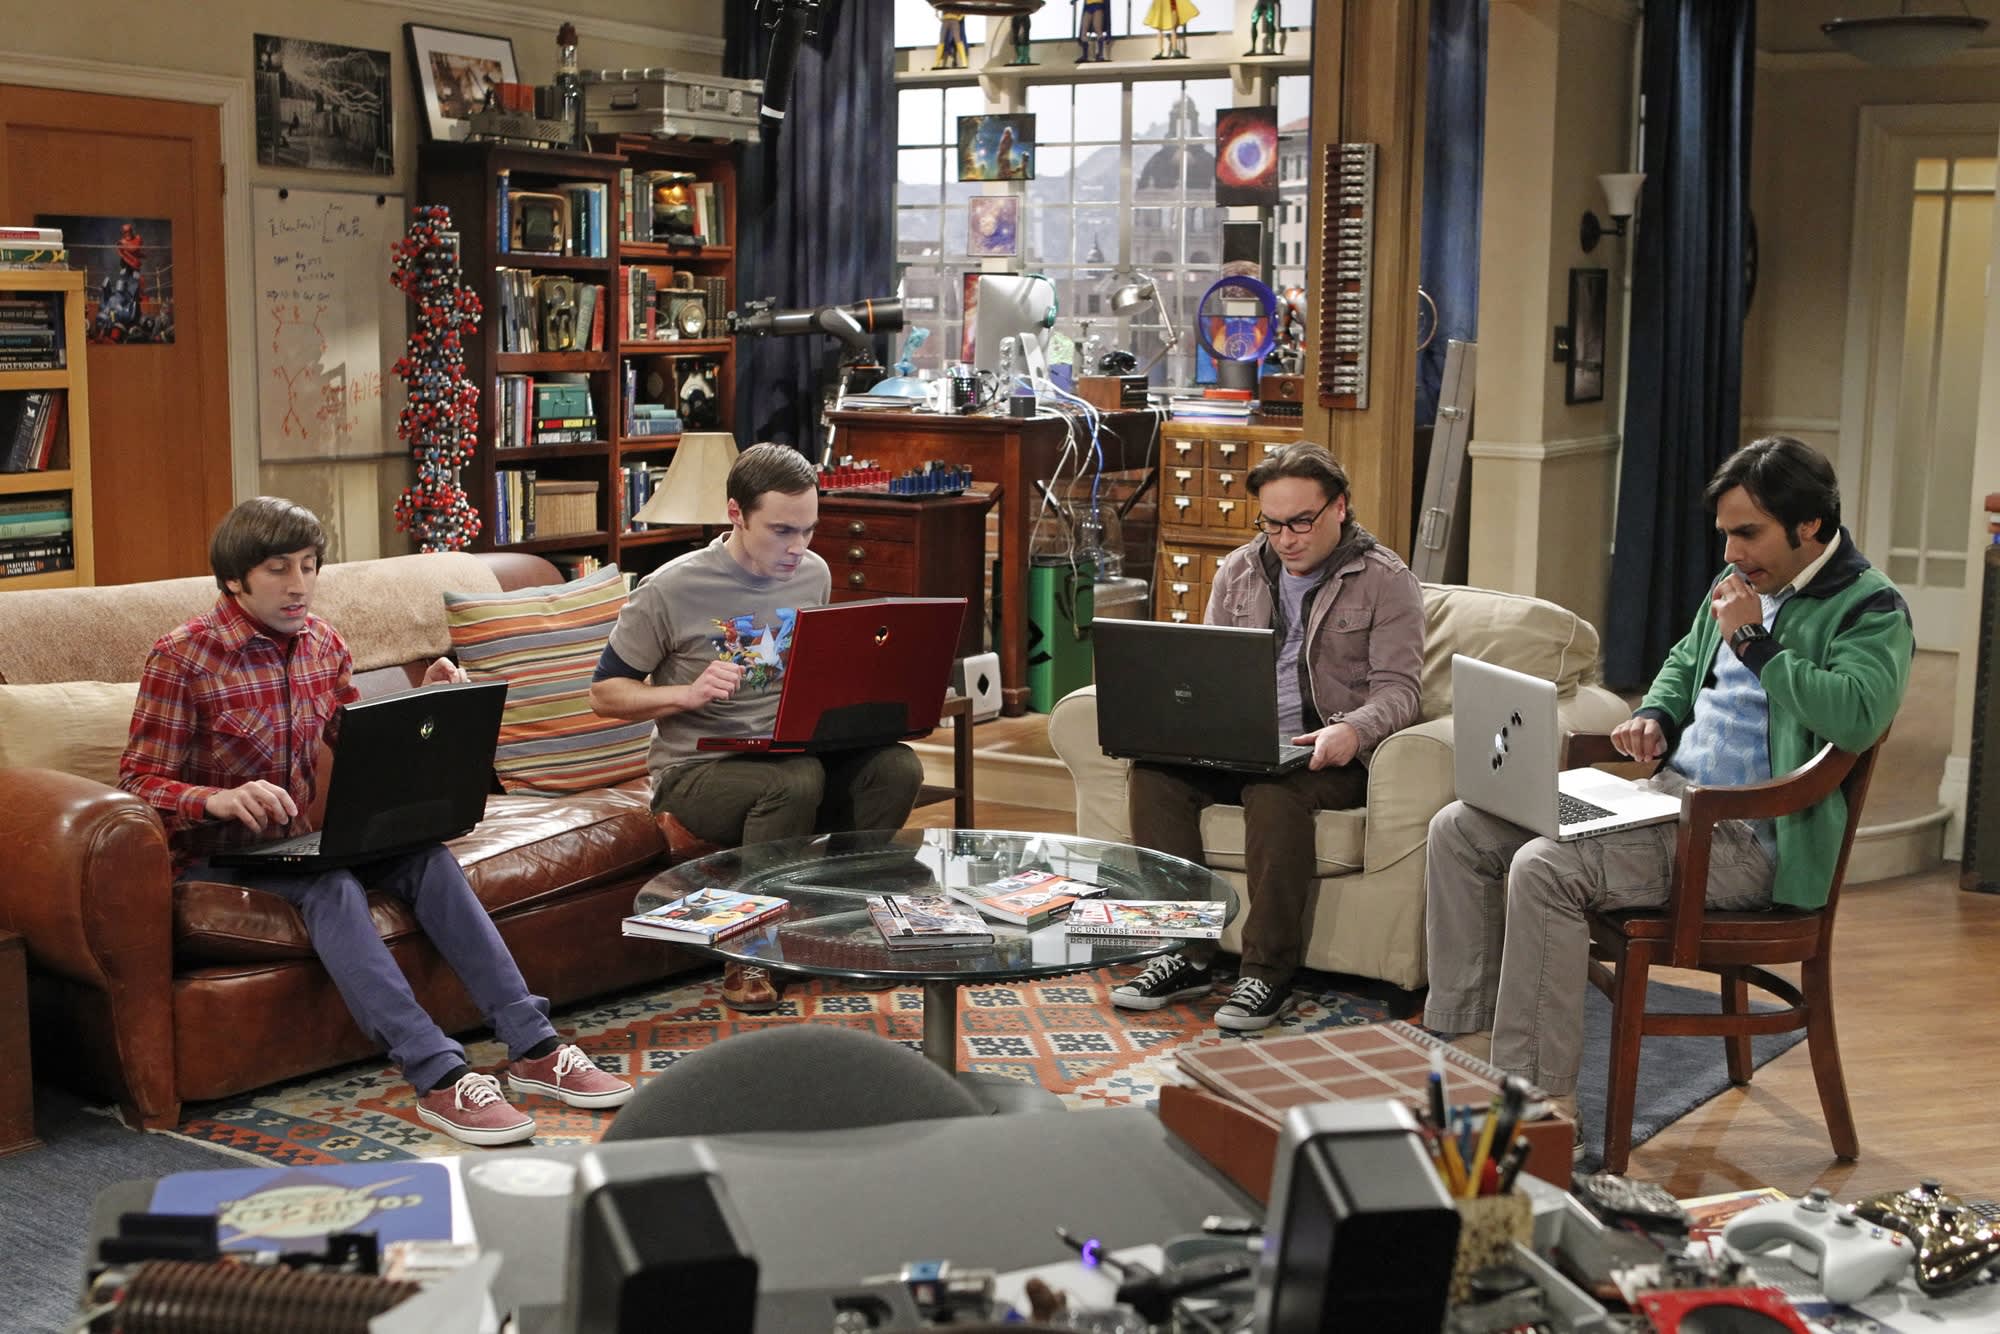 Et kors At øge Kano HBO Max scores exclusive streaming rights to 'The Big Bang Theory'